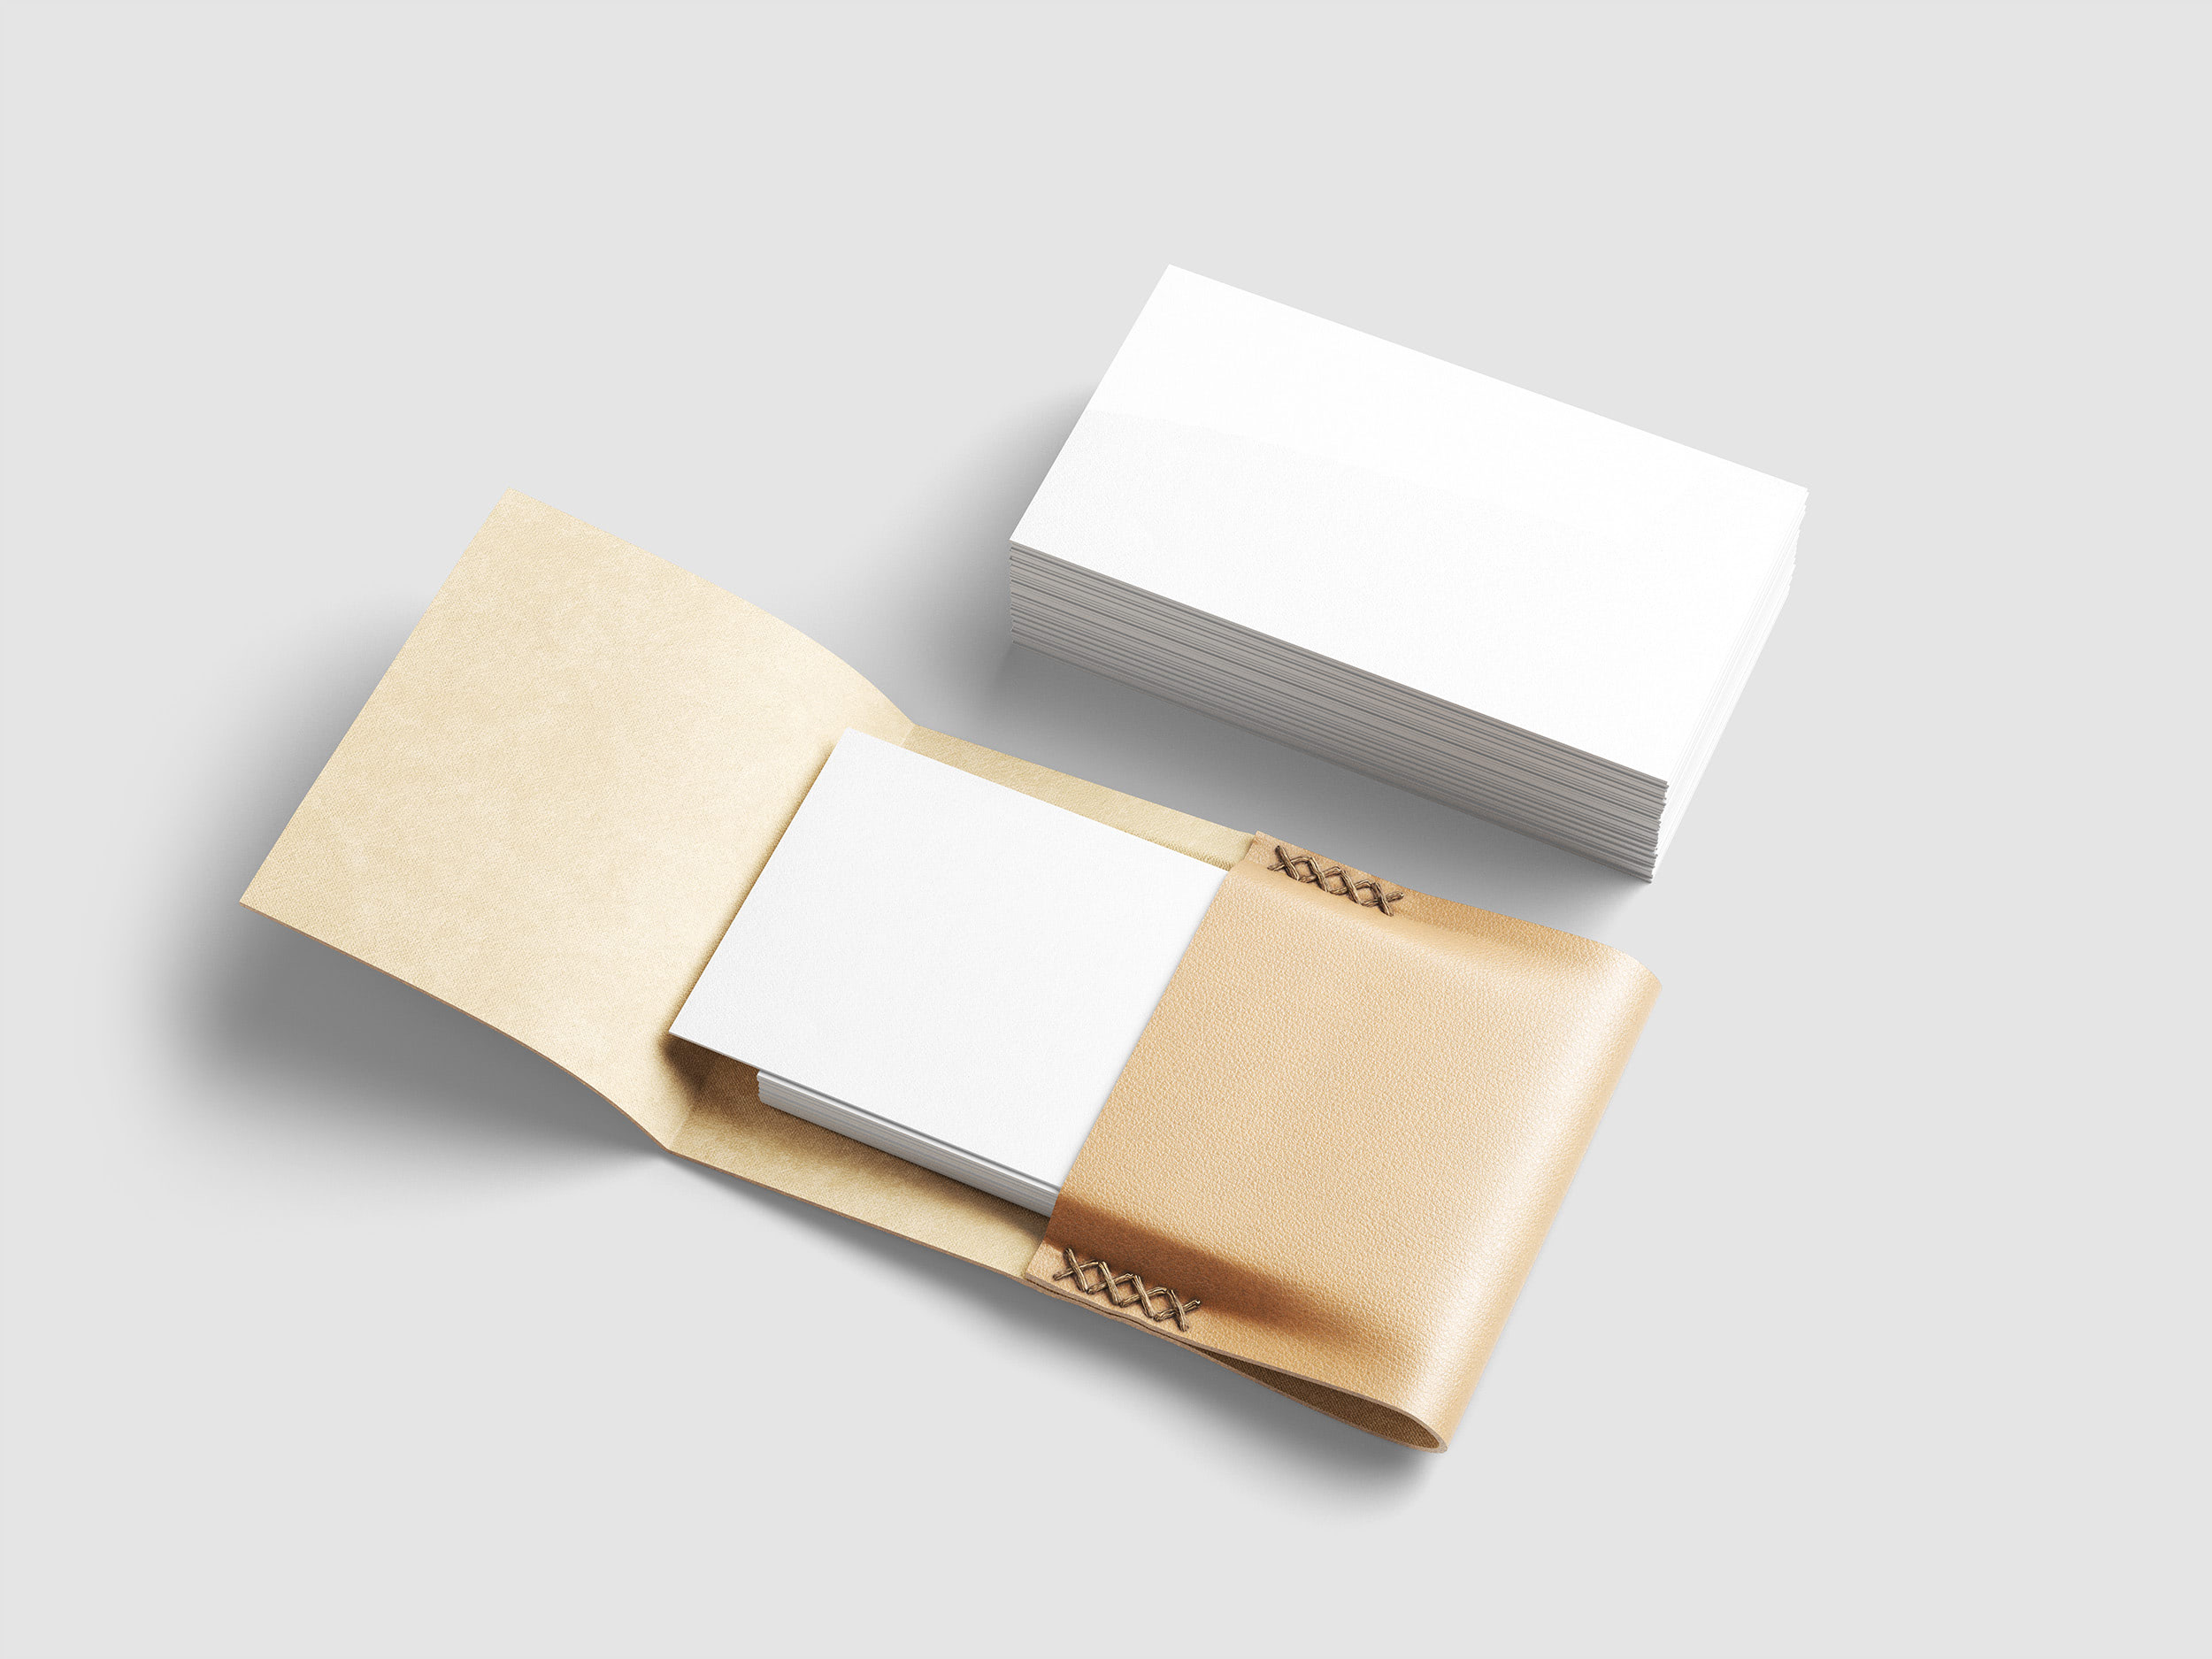 Free Business Cards with Leather Card Holder Mockup PSD